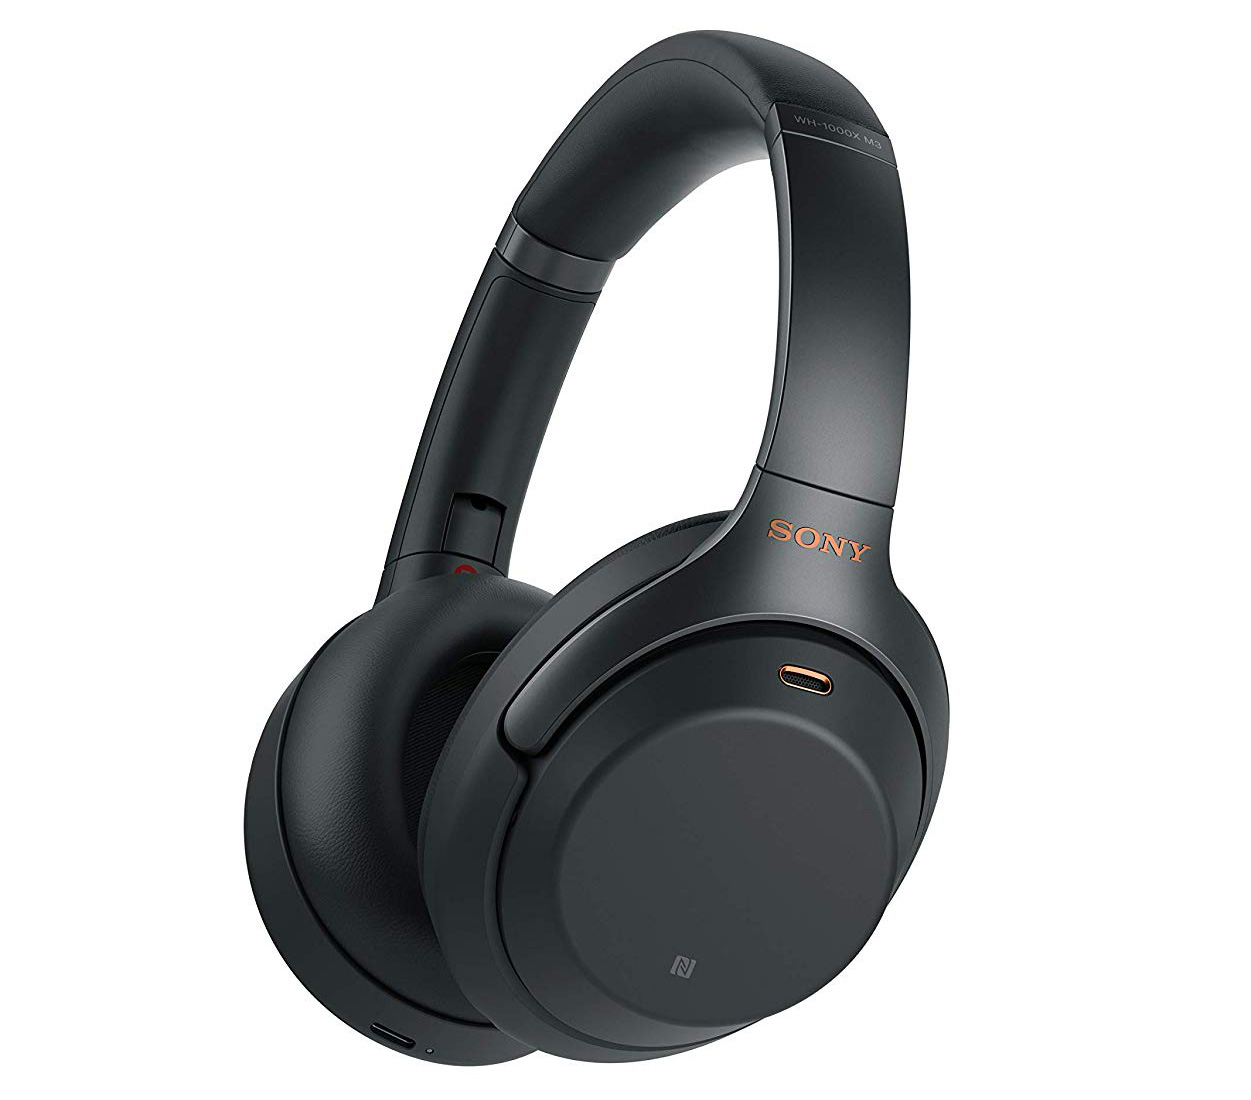 Auriculares Beats Solo3 Wireless